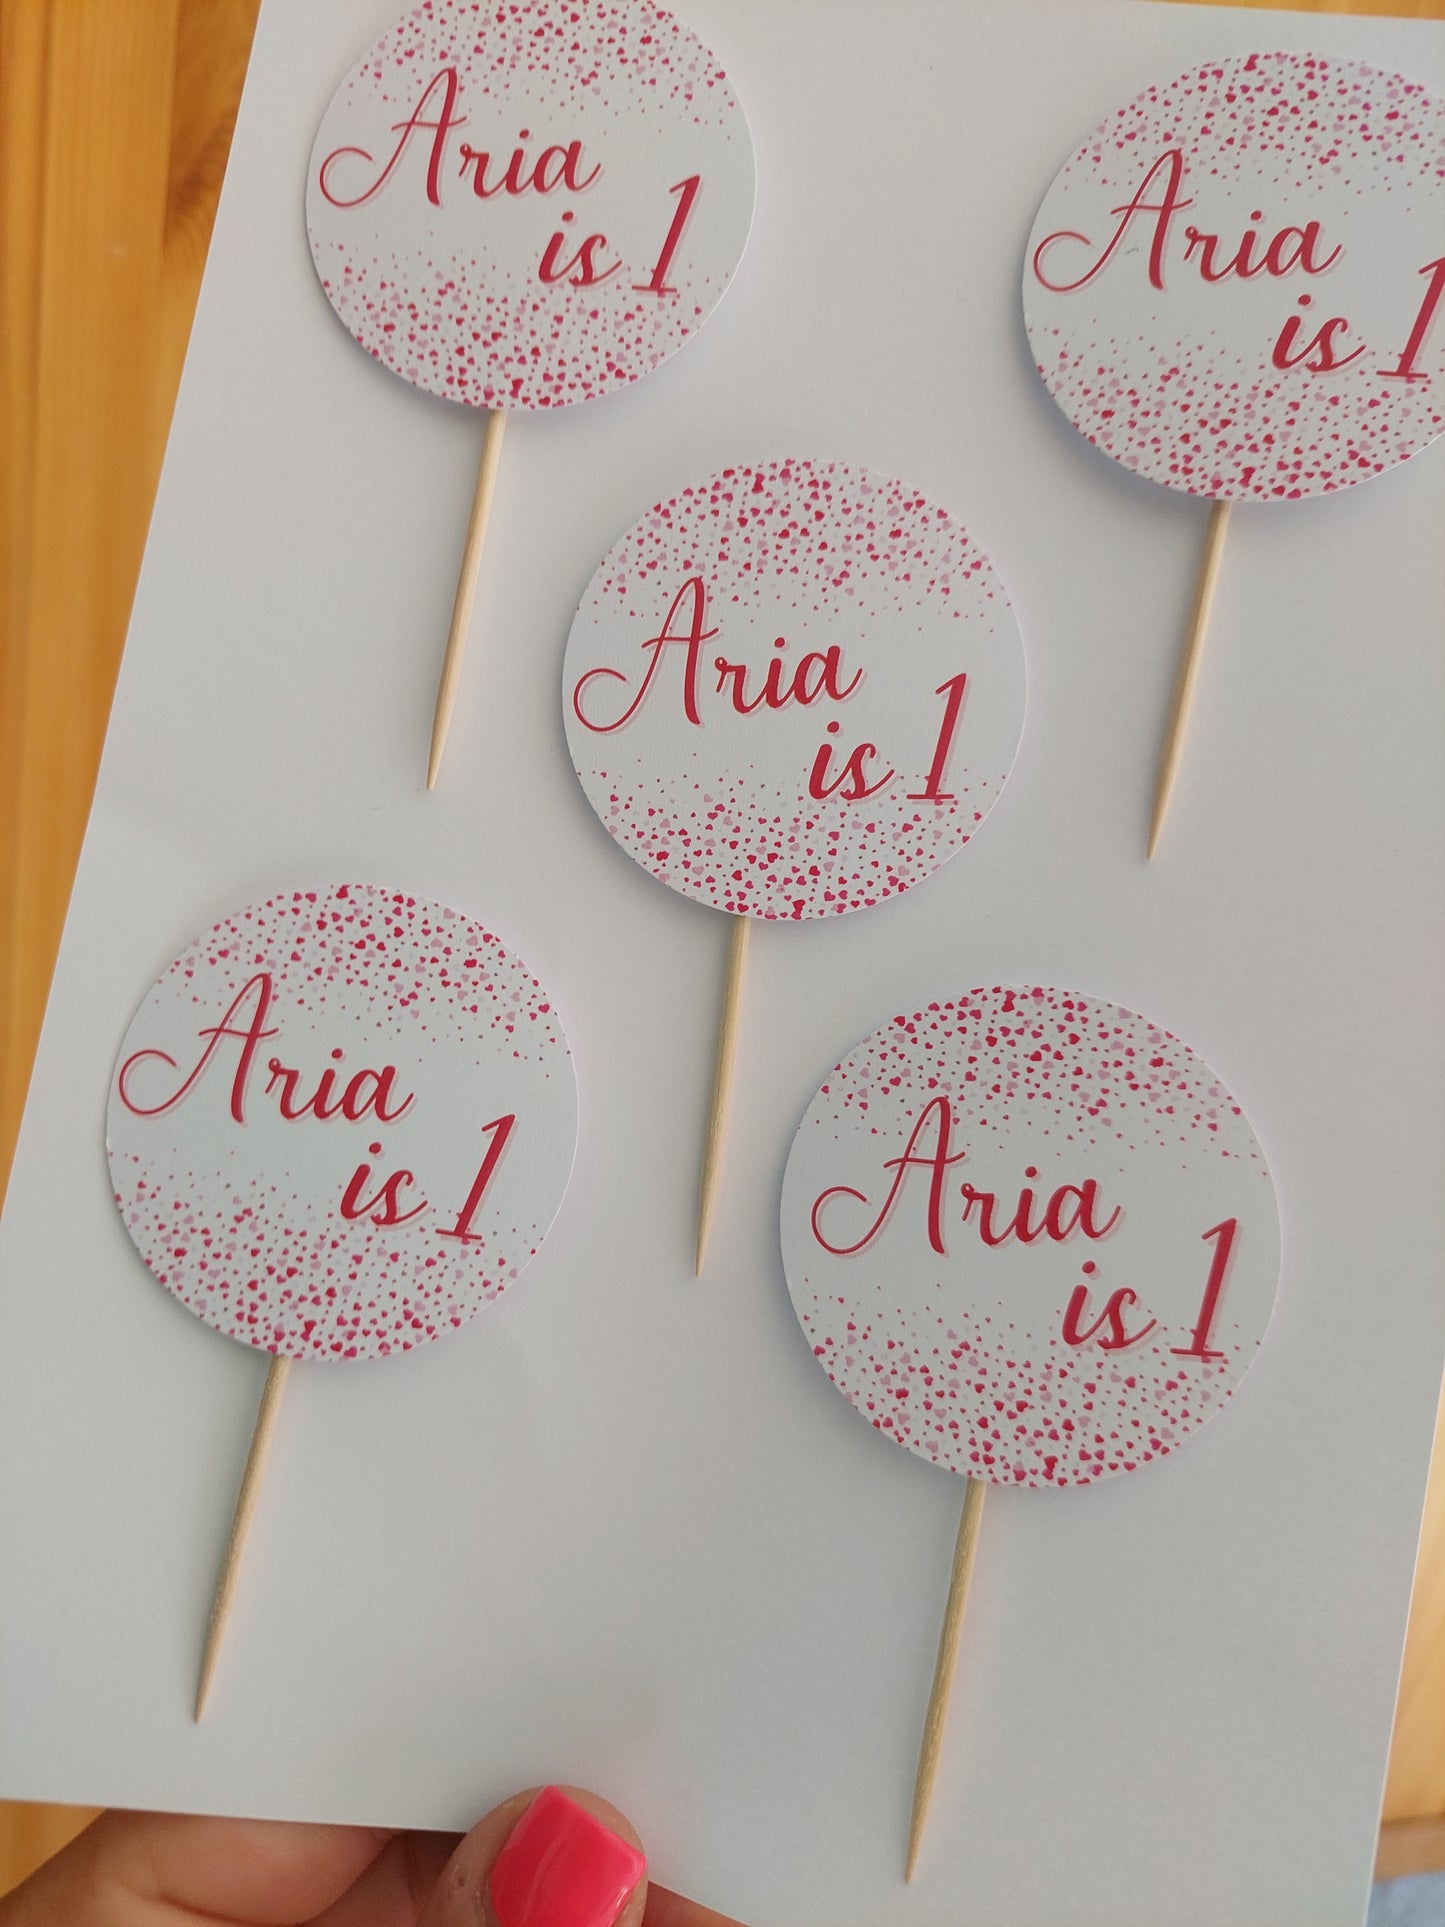 Cupcake Toppers | 5 x Aria is 1 Cupcake Toppers - Heart Design | SALE ITEM